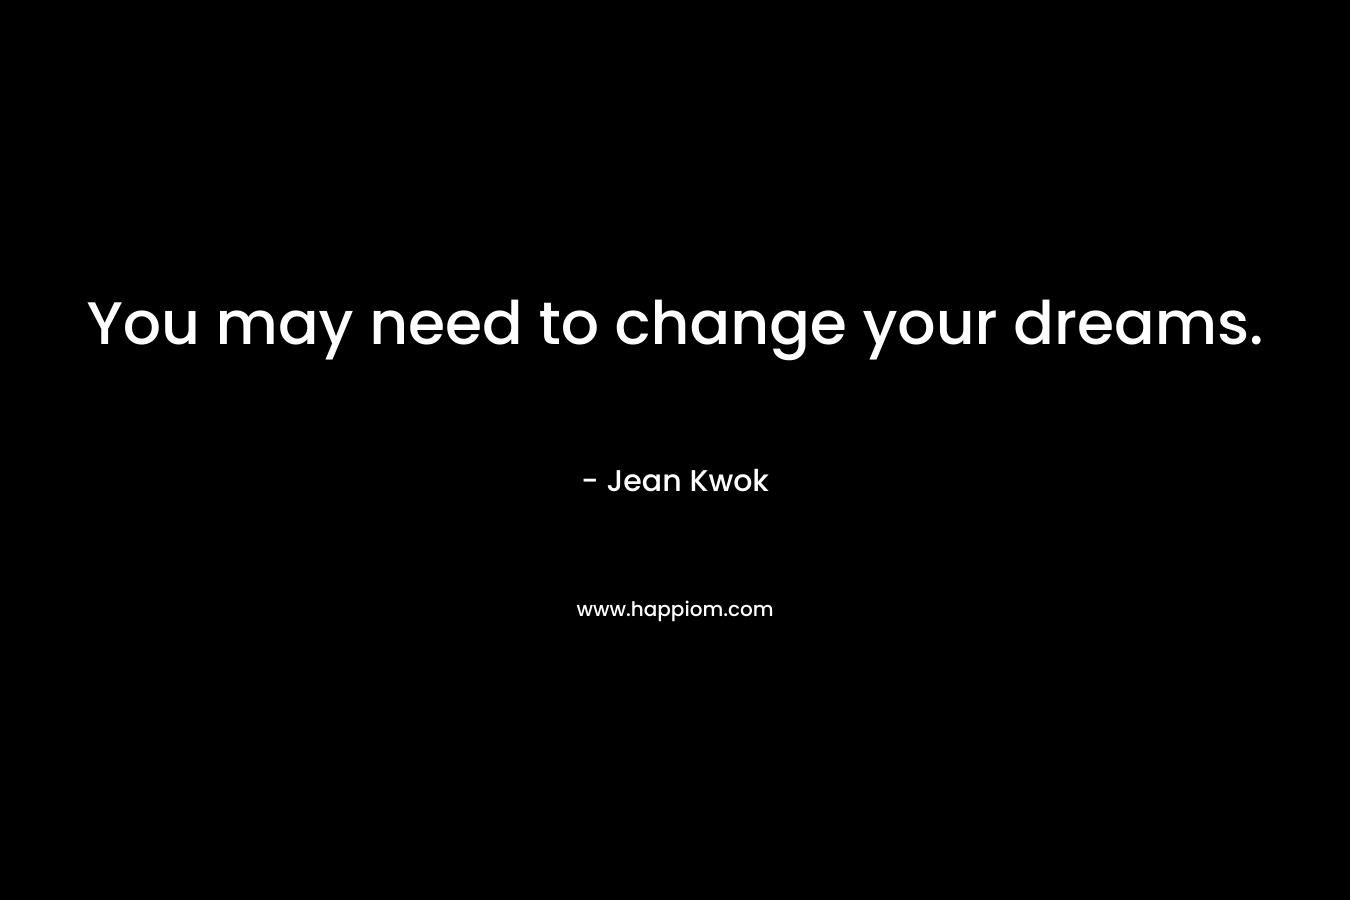 You may need to change your dreams.